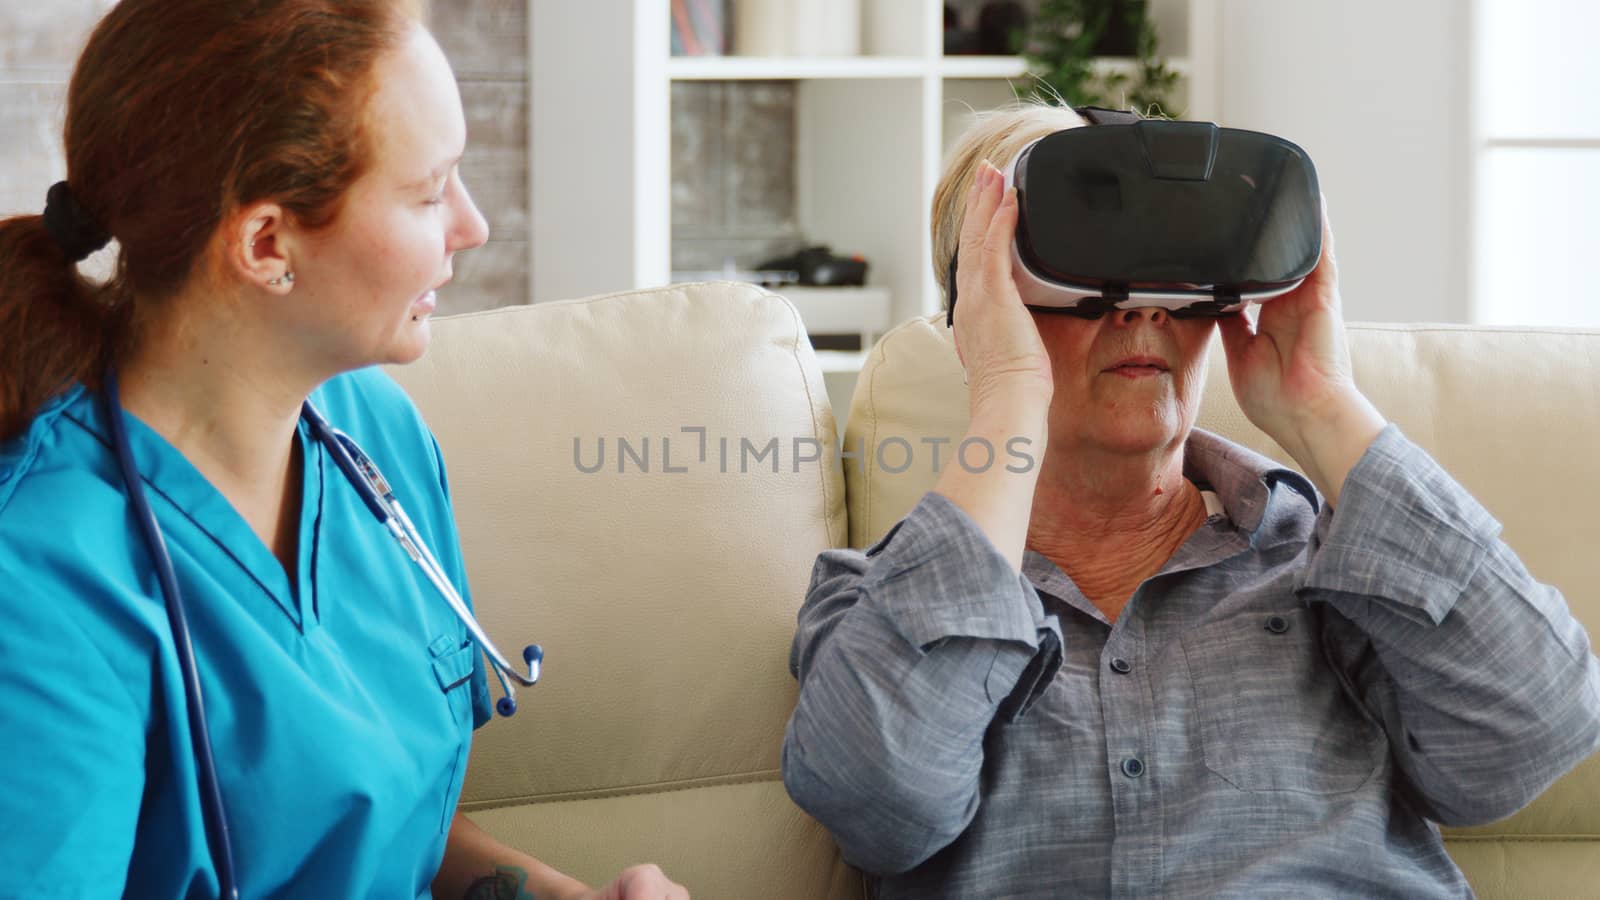 Female nurse helping senior woman to experience virtual reality with vr goggles in nursing home